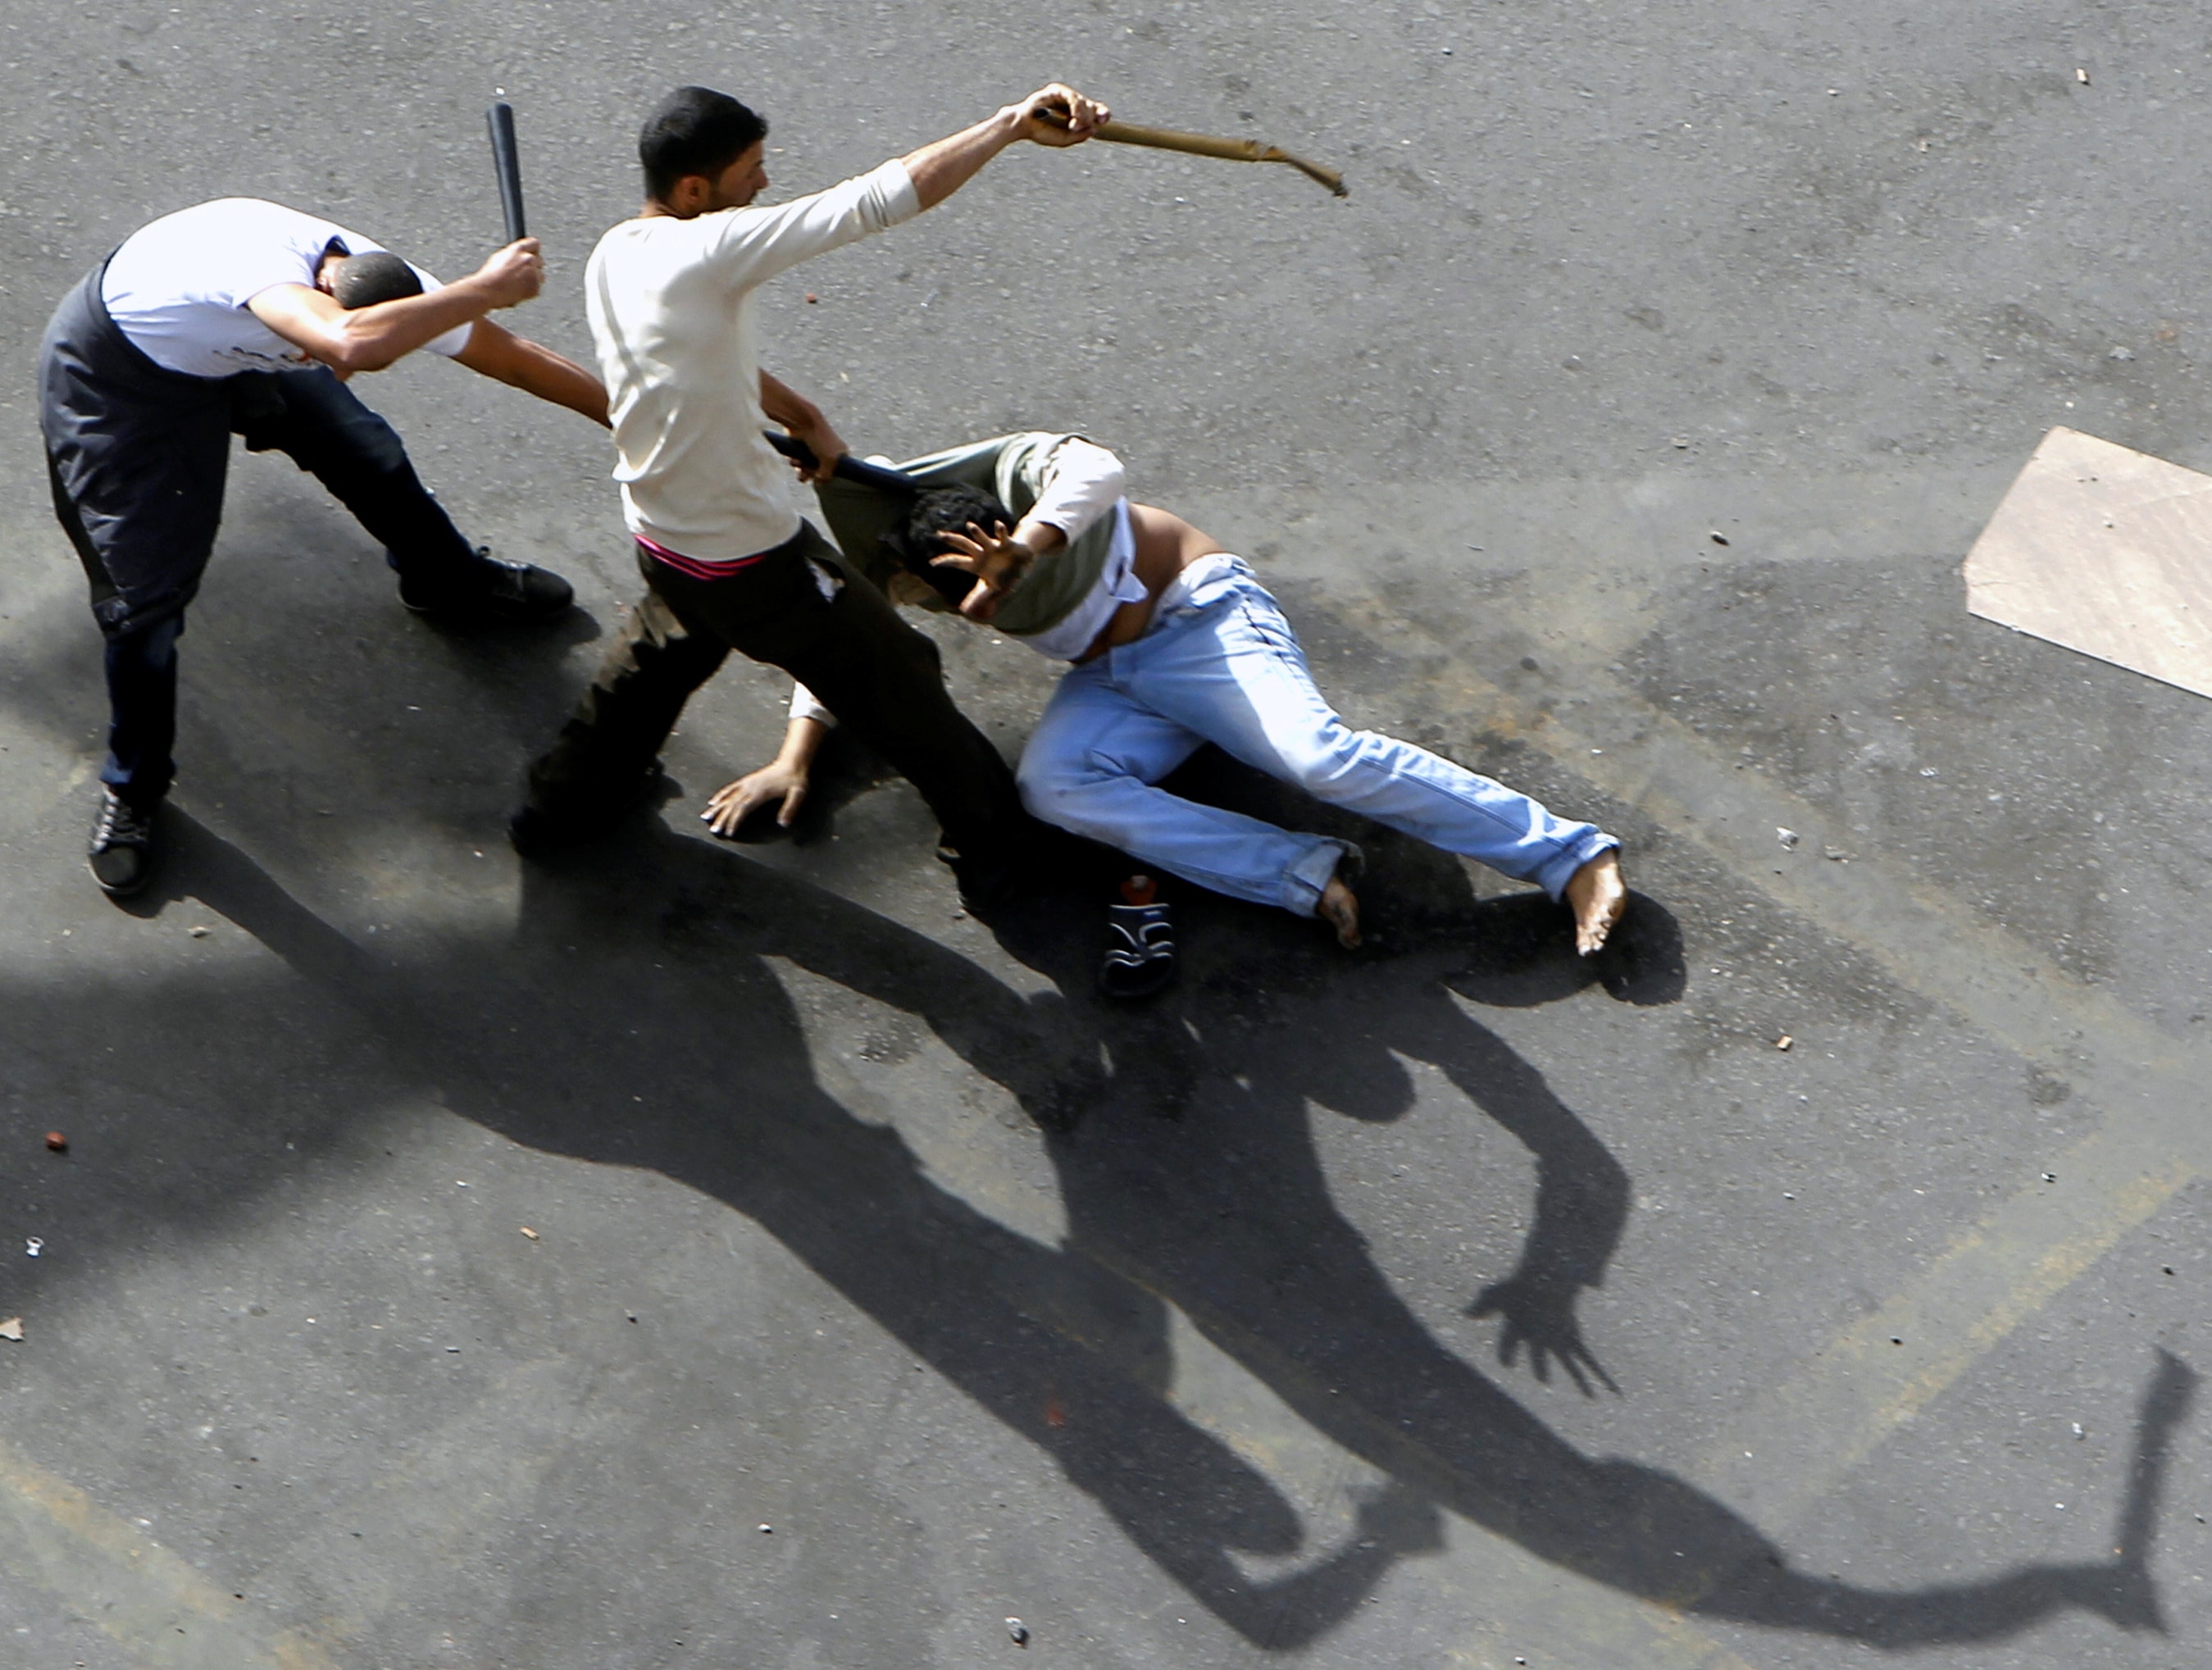 Plain-clothes security personnel beat an anti-government protester at Cairo's Tahrir Square on 3 March 2013, REUTERS/Mohamed Abd El Ghany